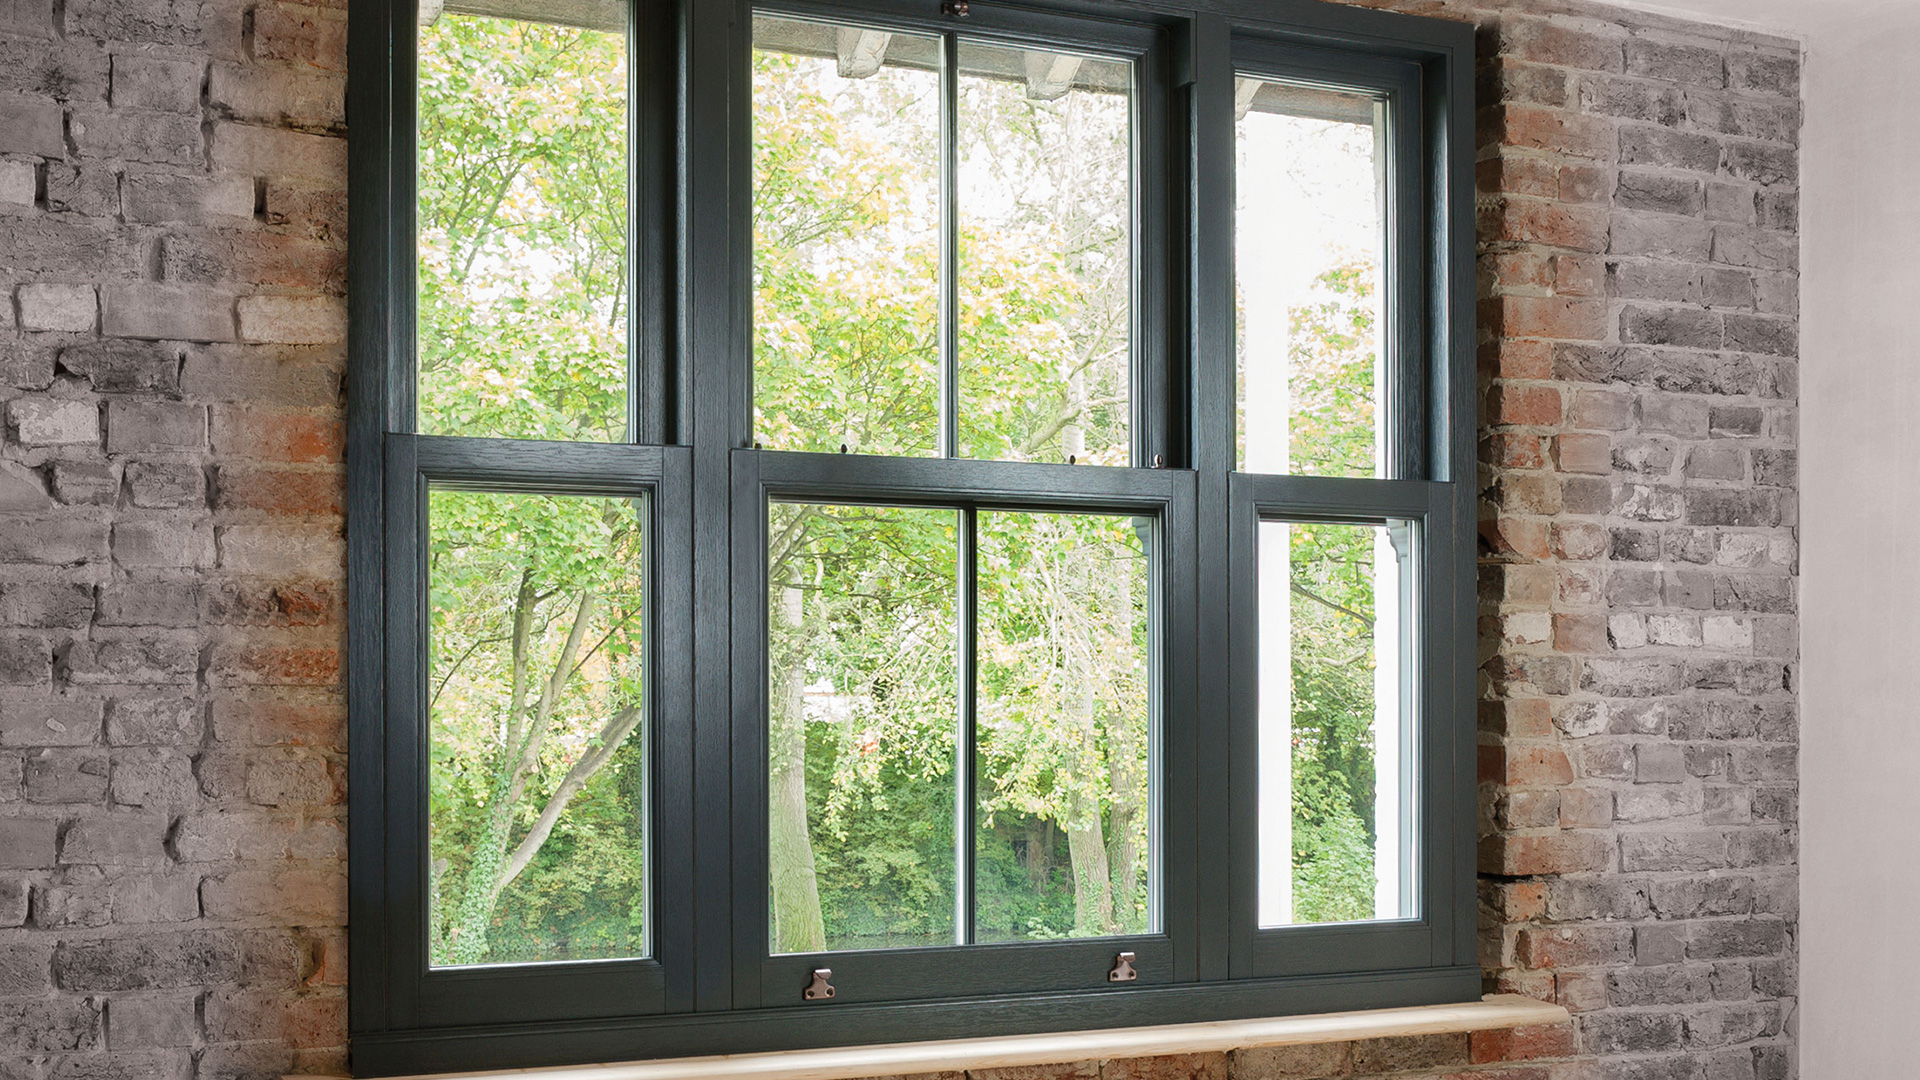 'Cheshire Bespoke Glazing - Made To Measure Windows & Doors - Book your appointment on 07925 735 922